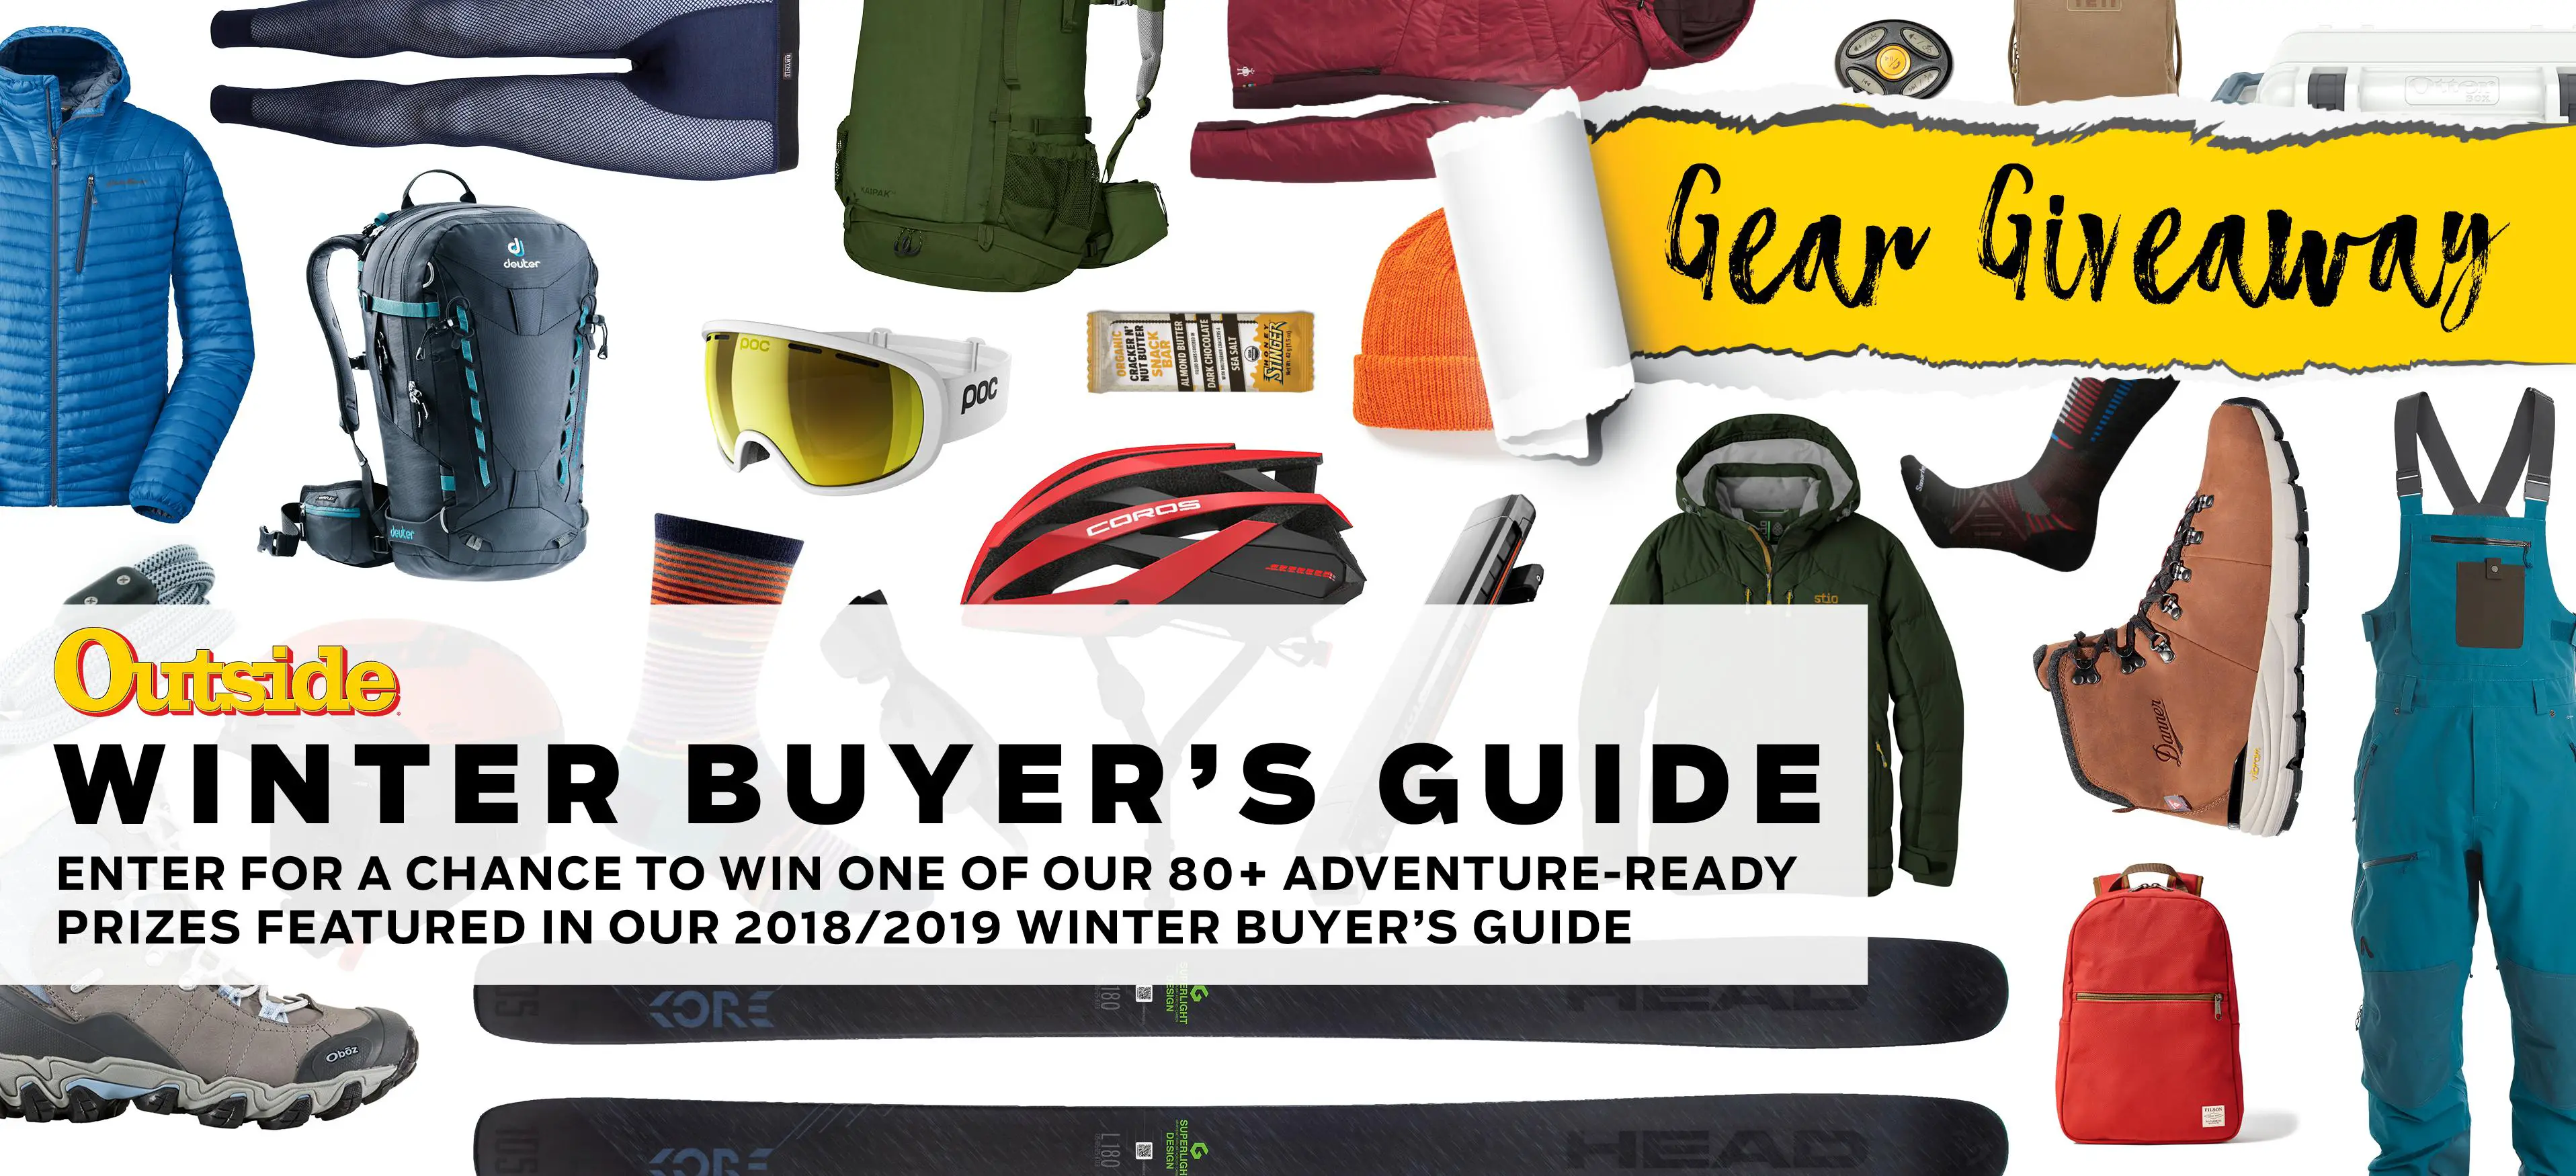 Enter the Outside Magazine’s Winter Buyer's Guide Gear Giveaway for your chance to win 1 of 87 adventure-ready prizes featured in their 2018/2019 Winter's Buying guide